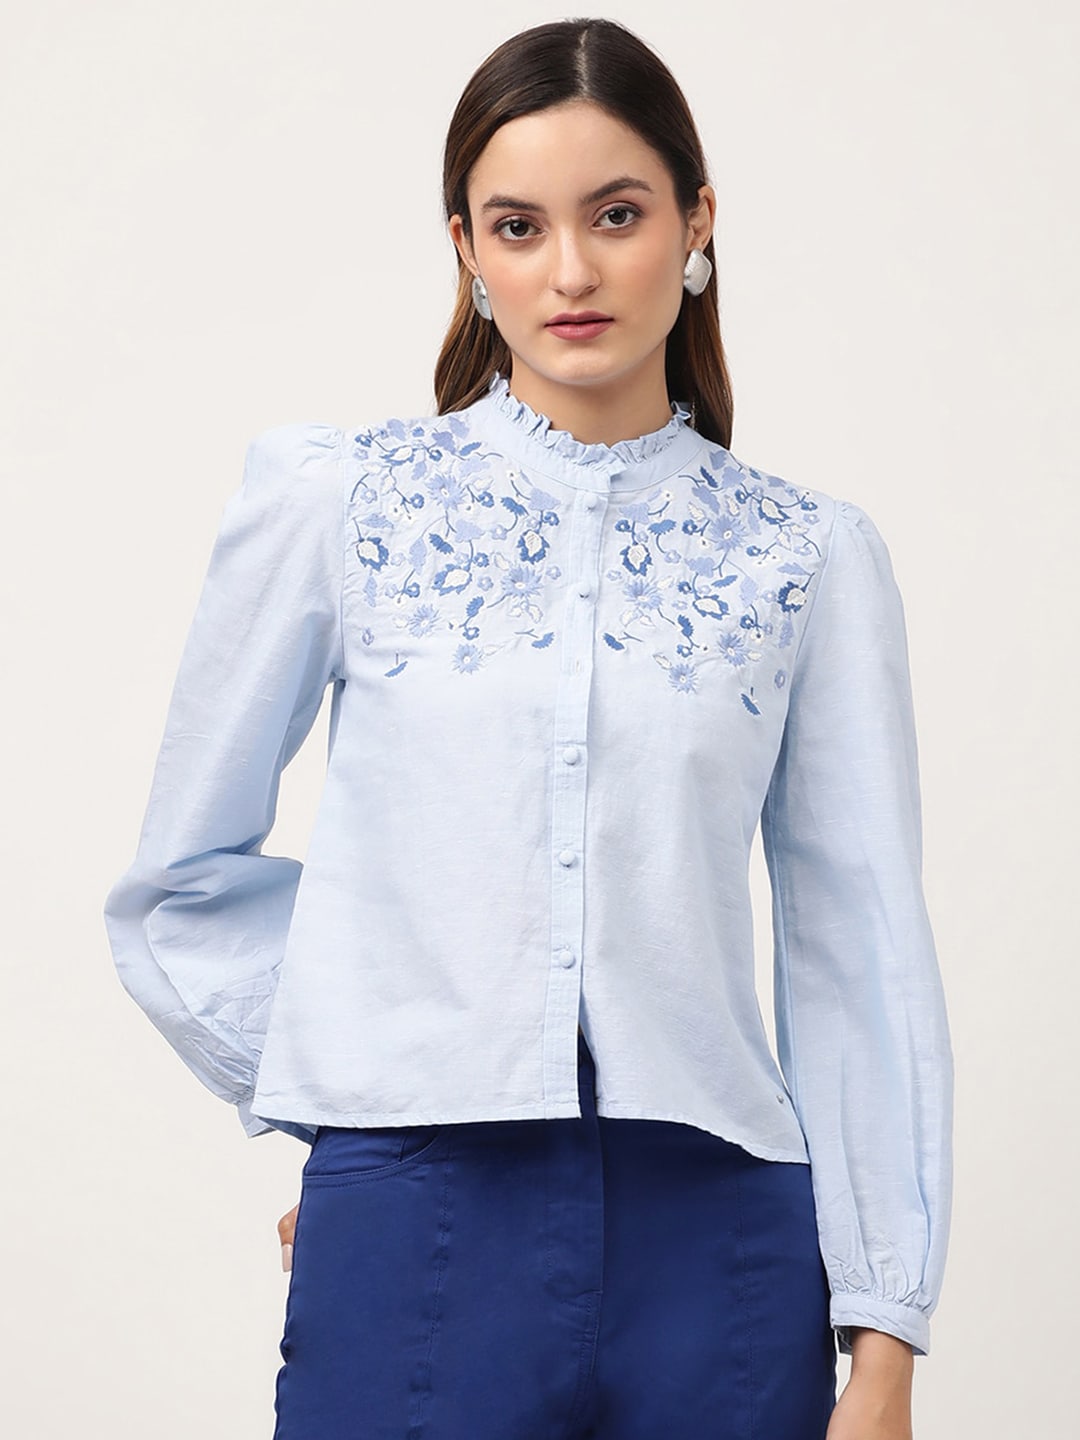 ELLE Blue Floral Mandarin Collar Shirt Style Cotton Top Price in India